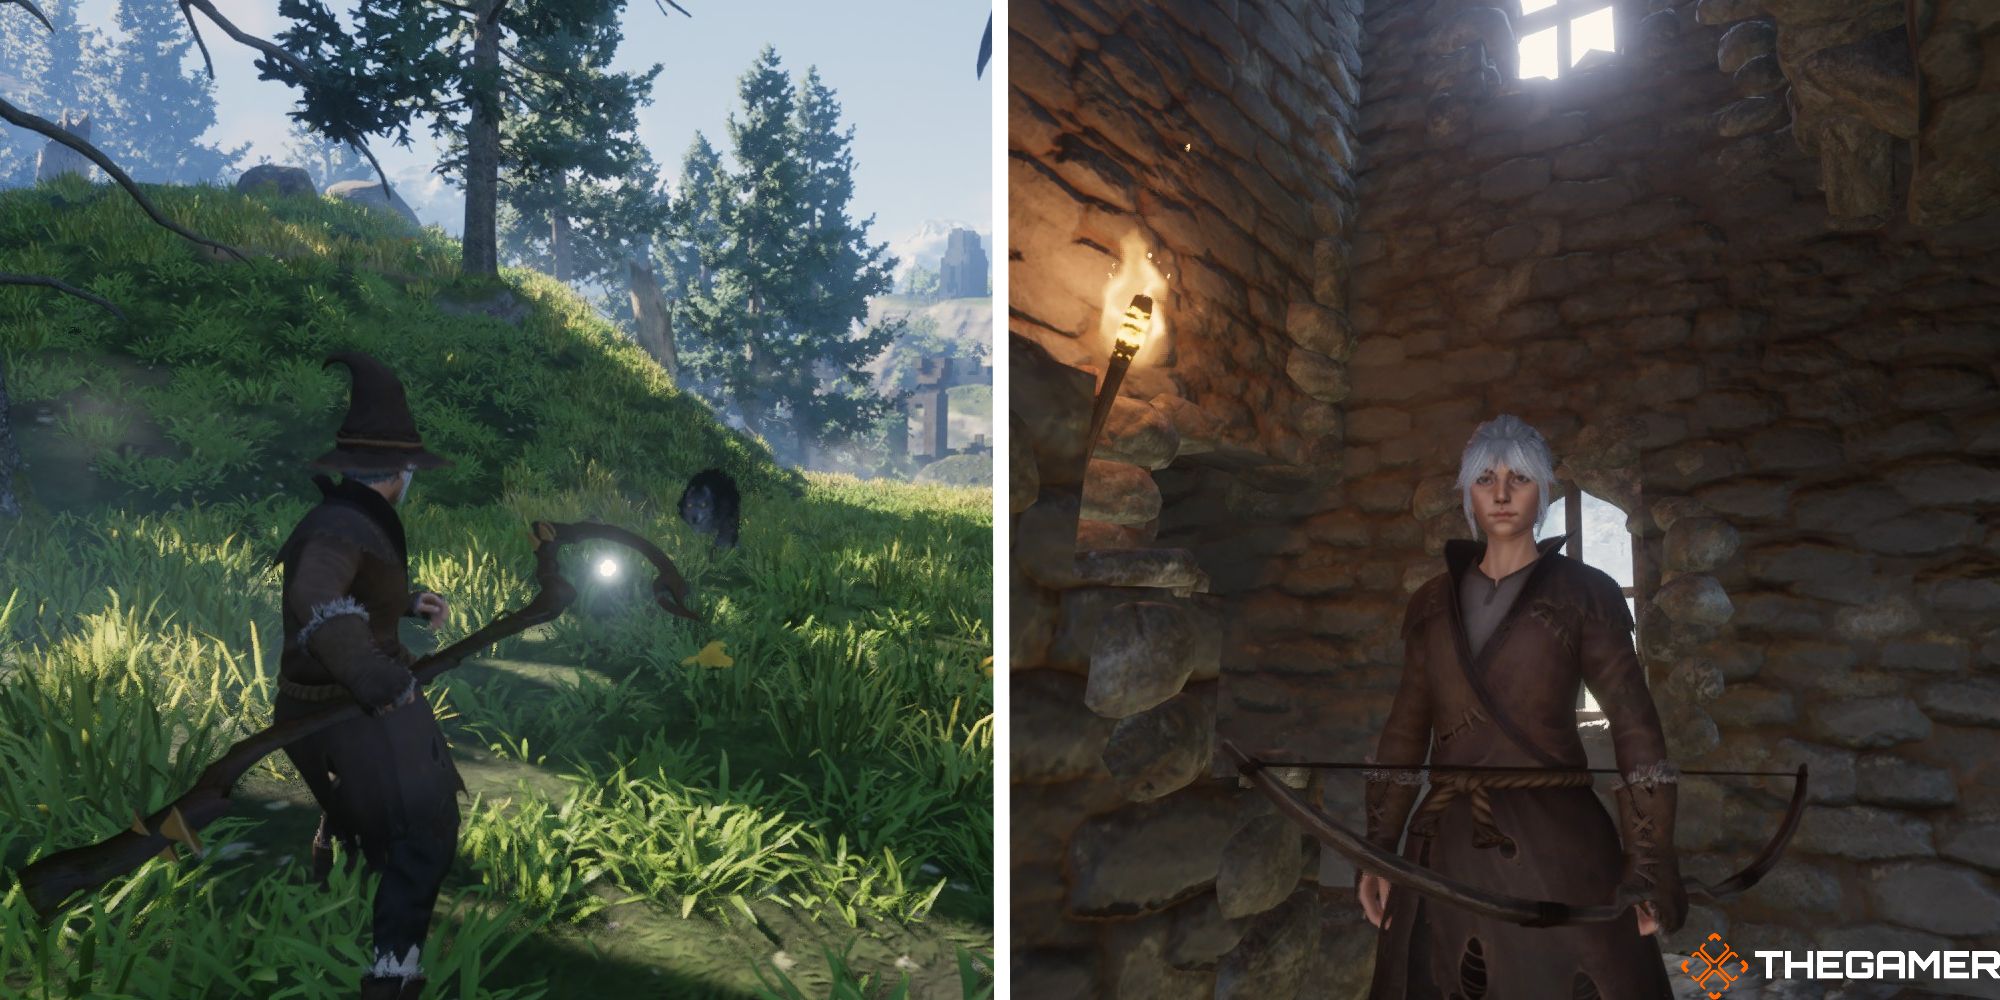 enshrouded split image showing player using a staff next to image of player holding bow inside